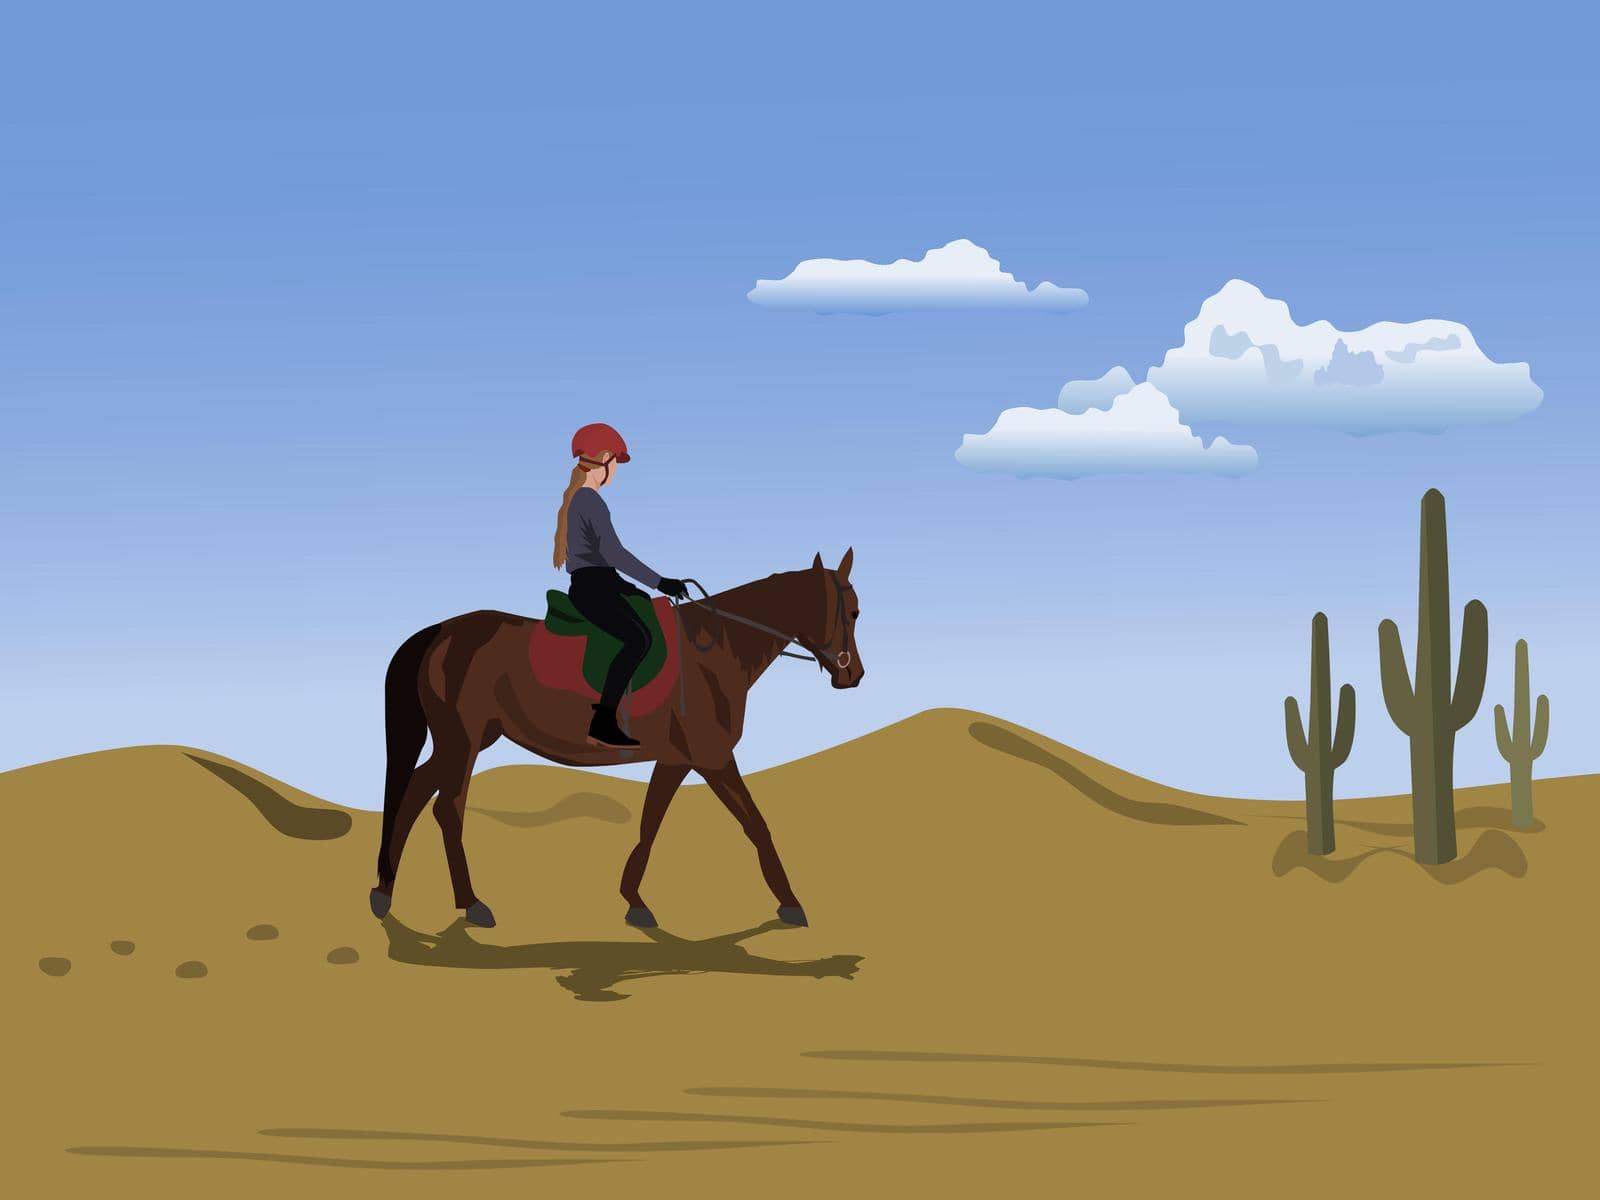 A woman riding a horse in the desert with sky and clouds in the background. by moo12